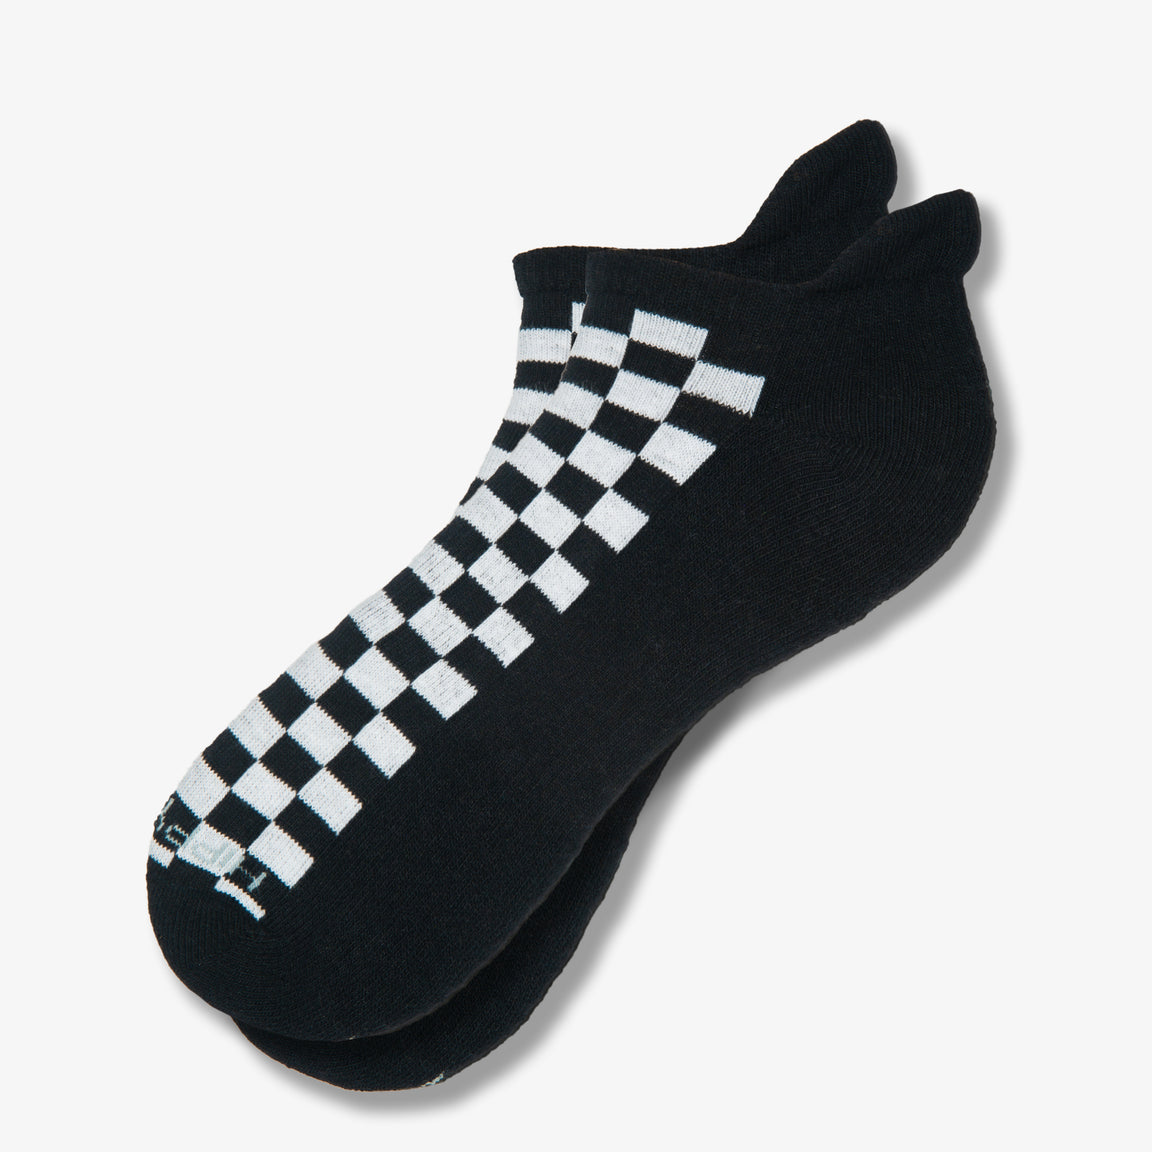 Most Comfortable Ankle Socks - Eco-friendly - Hippy Feet